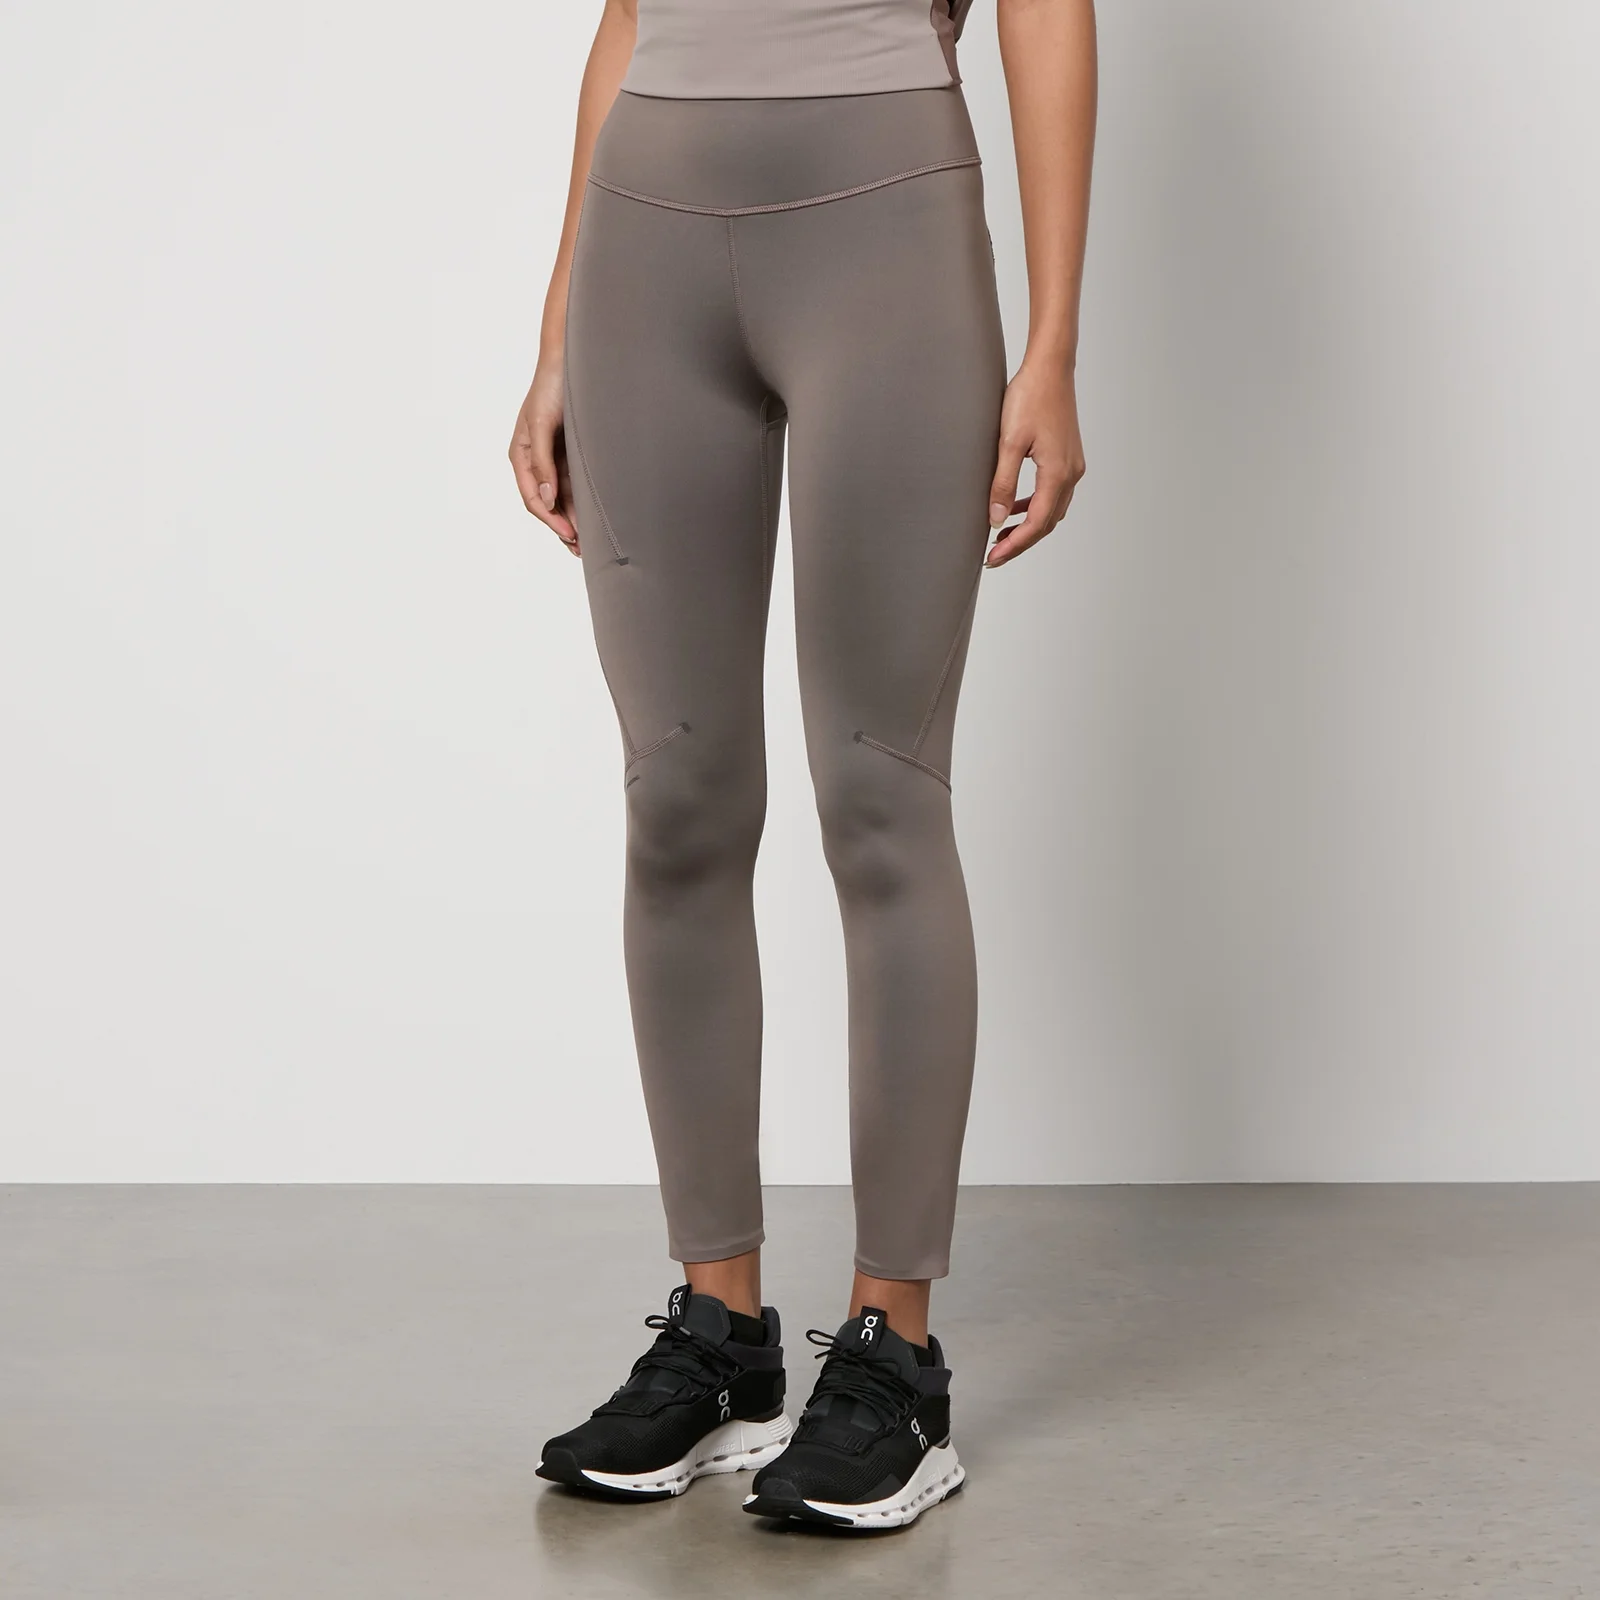 ON Performance 7/8 Stretch-Jersey Leggings - XS Image 1